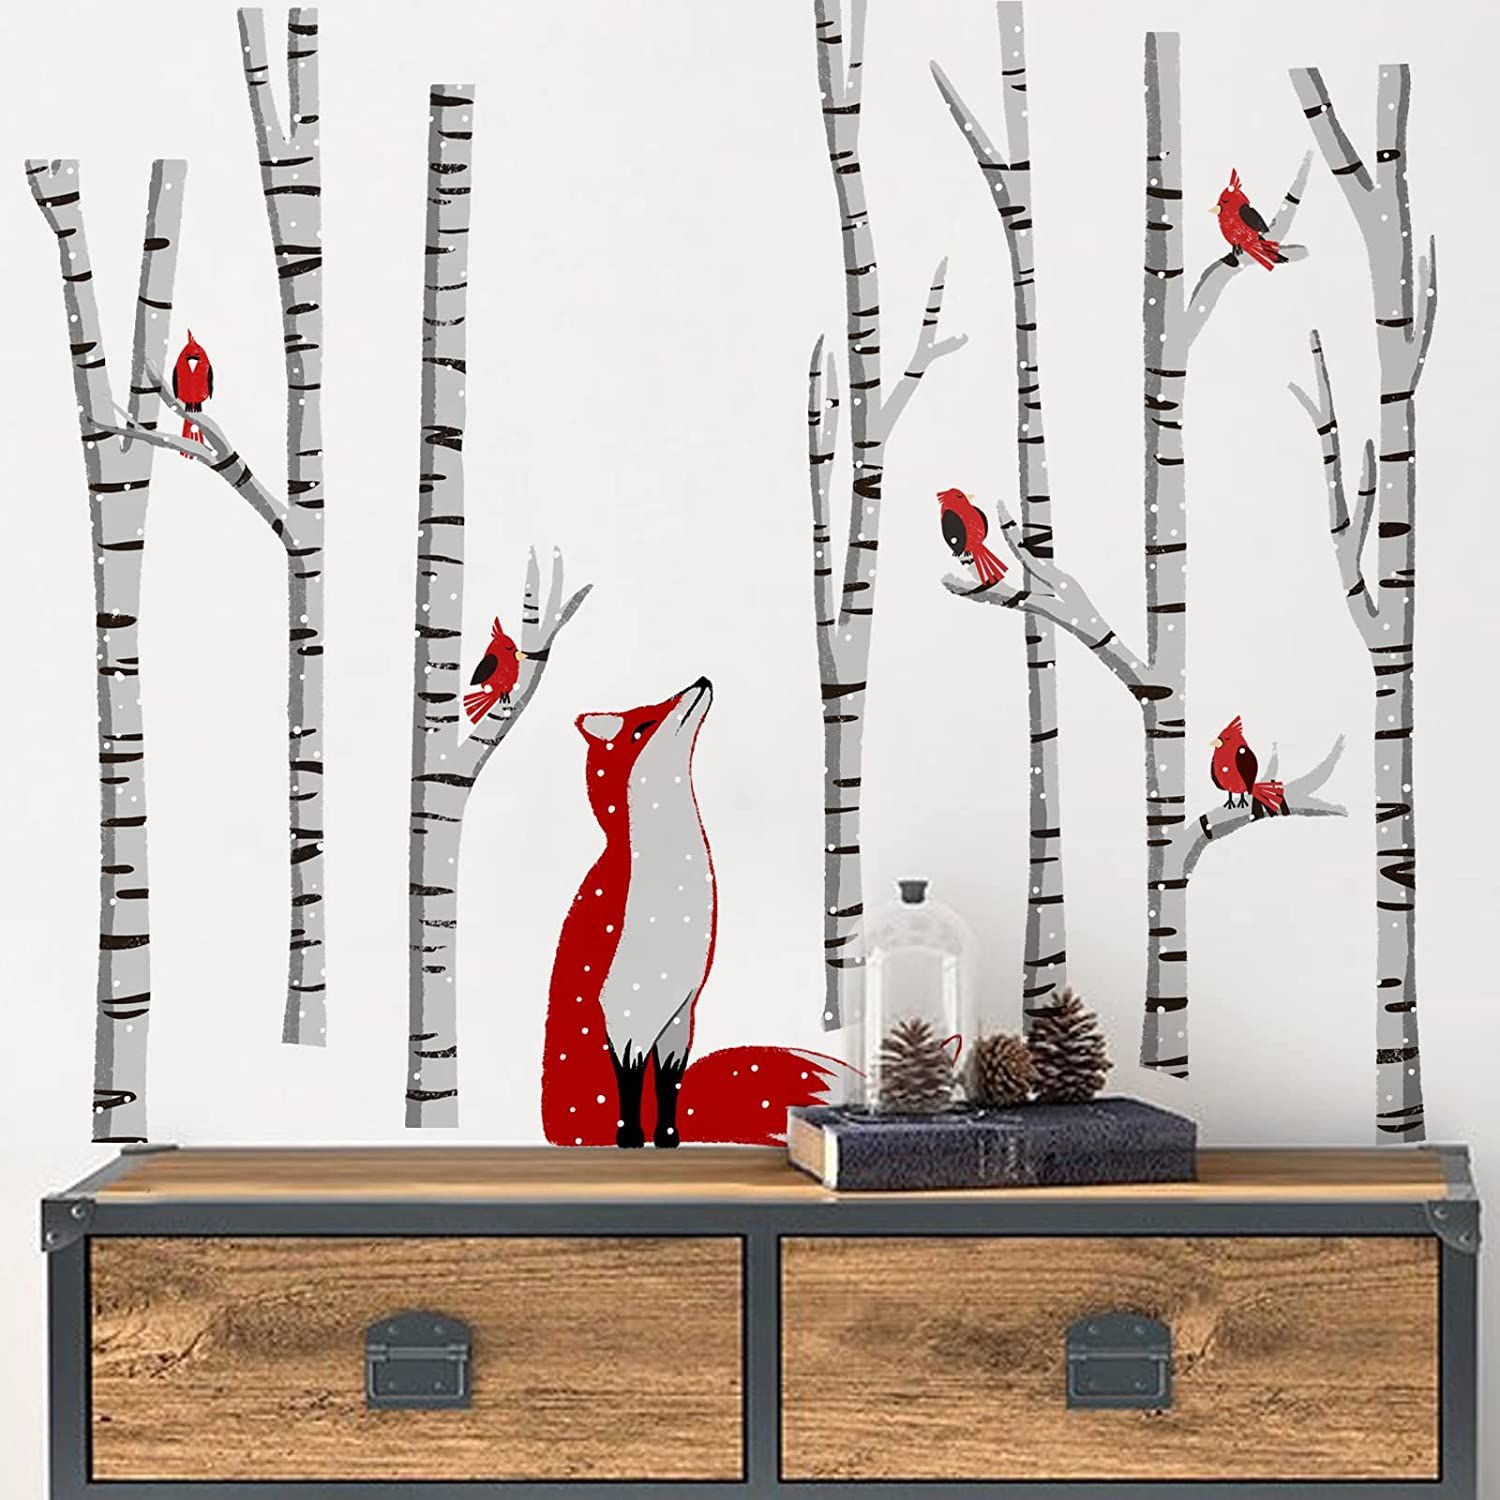 Winter Woodland Wall Decal